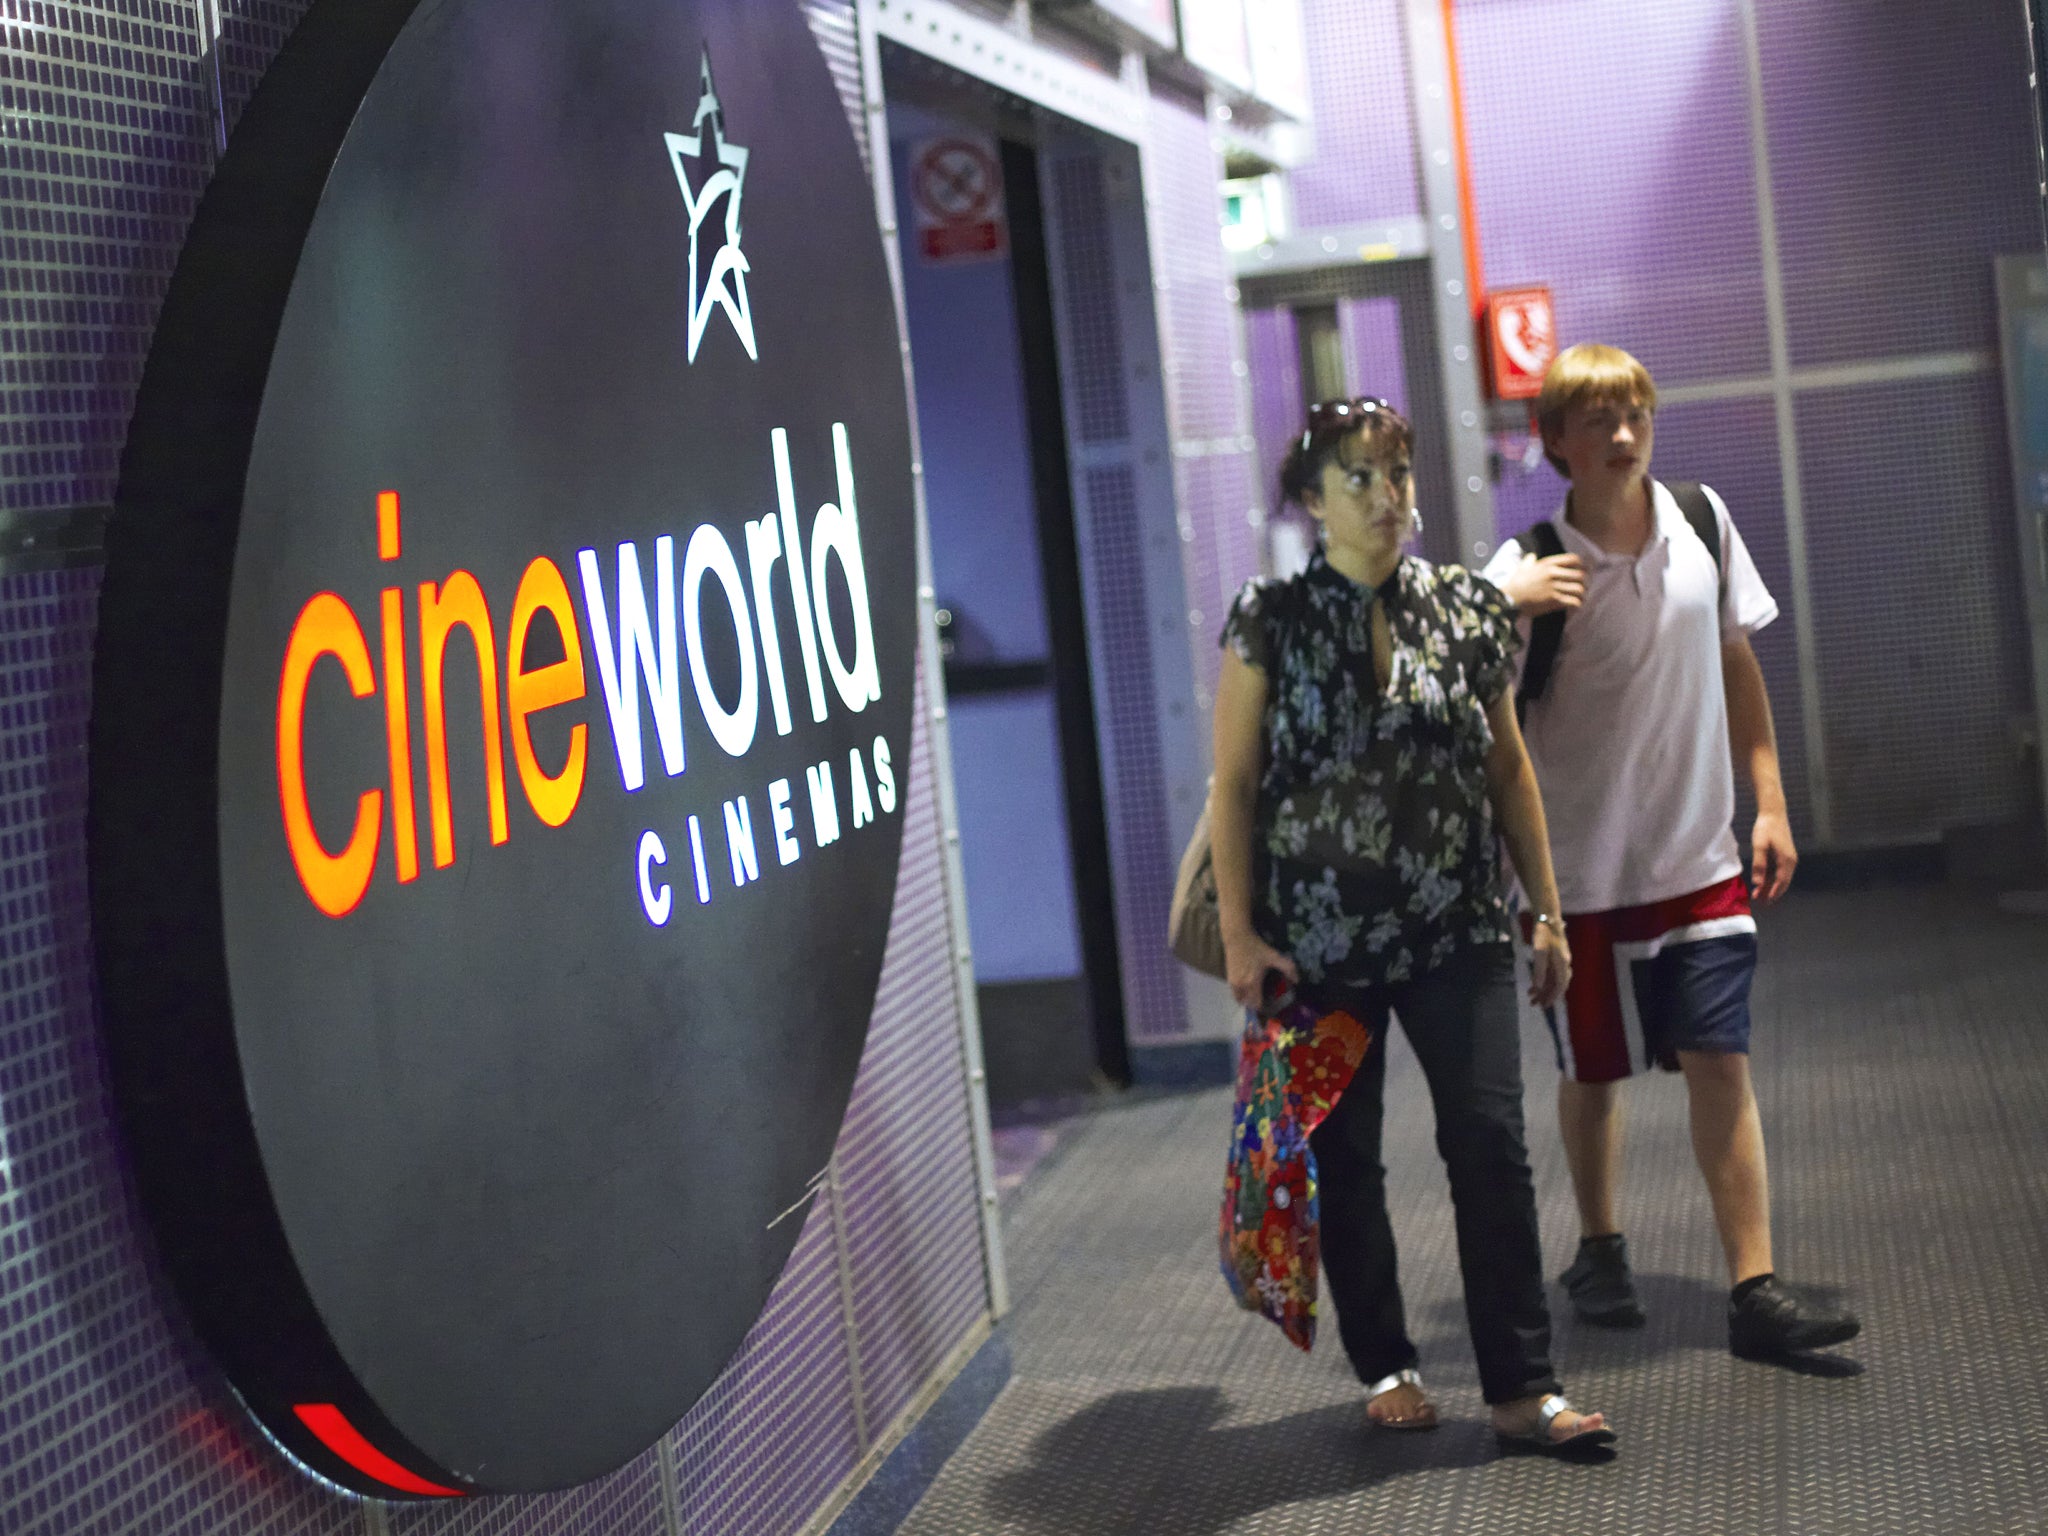 Cineworld bought Cinema City in 2014, making it Europe’s second-largest movie theatre chain